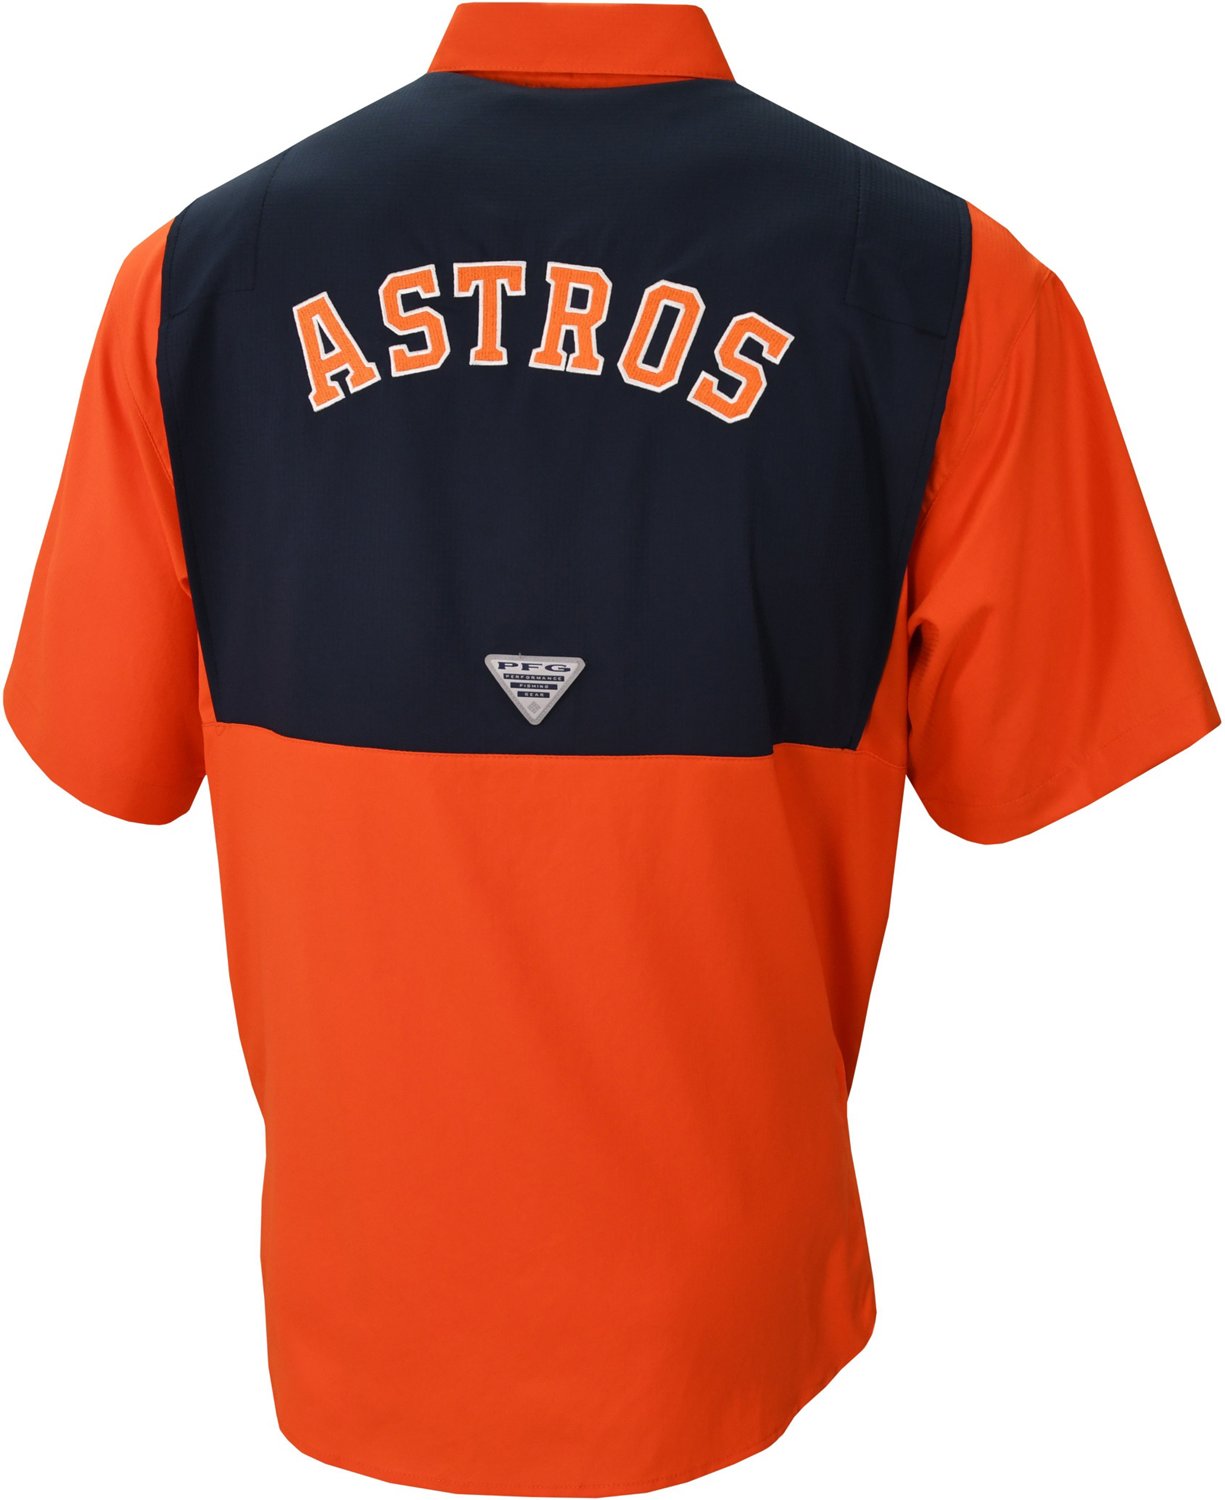 HOUSTON ASTROS COLUMBIA FISHING SHIRT for Sale in Friendswood, TX - OfferUp  